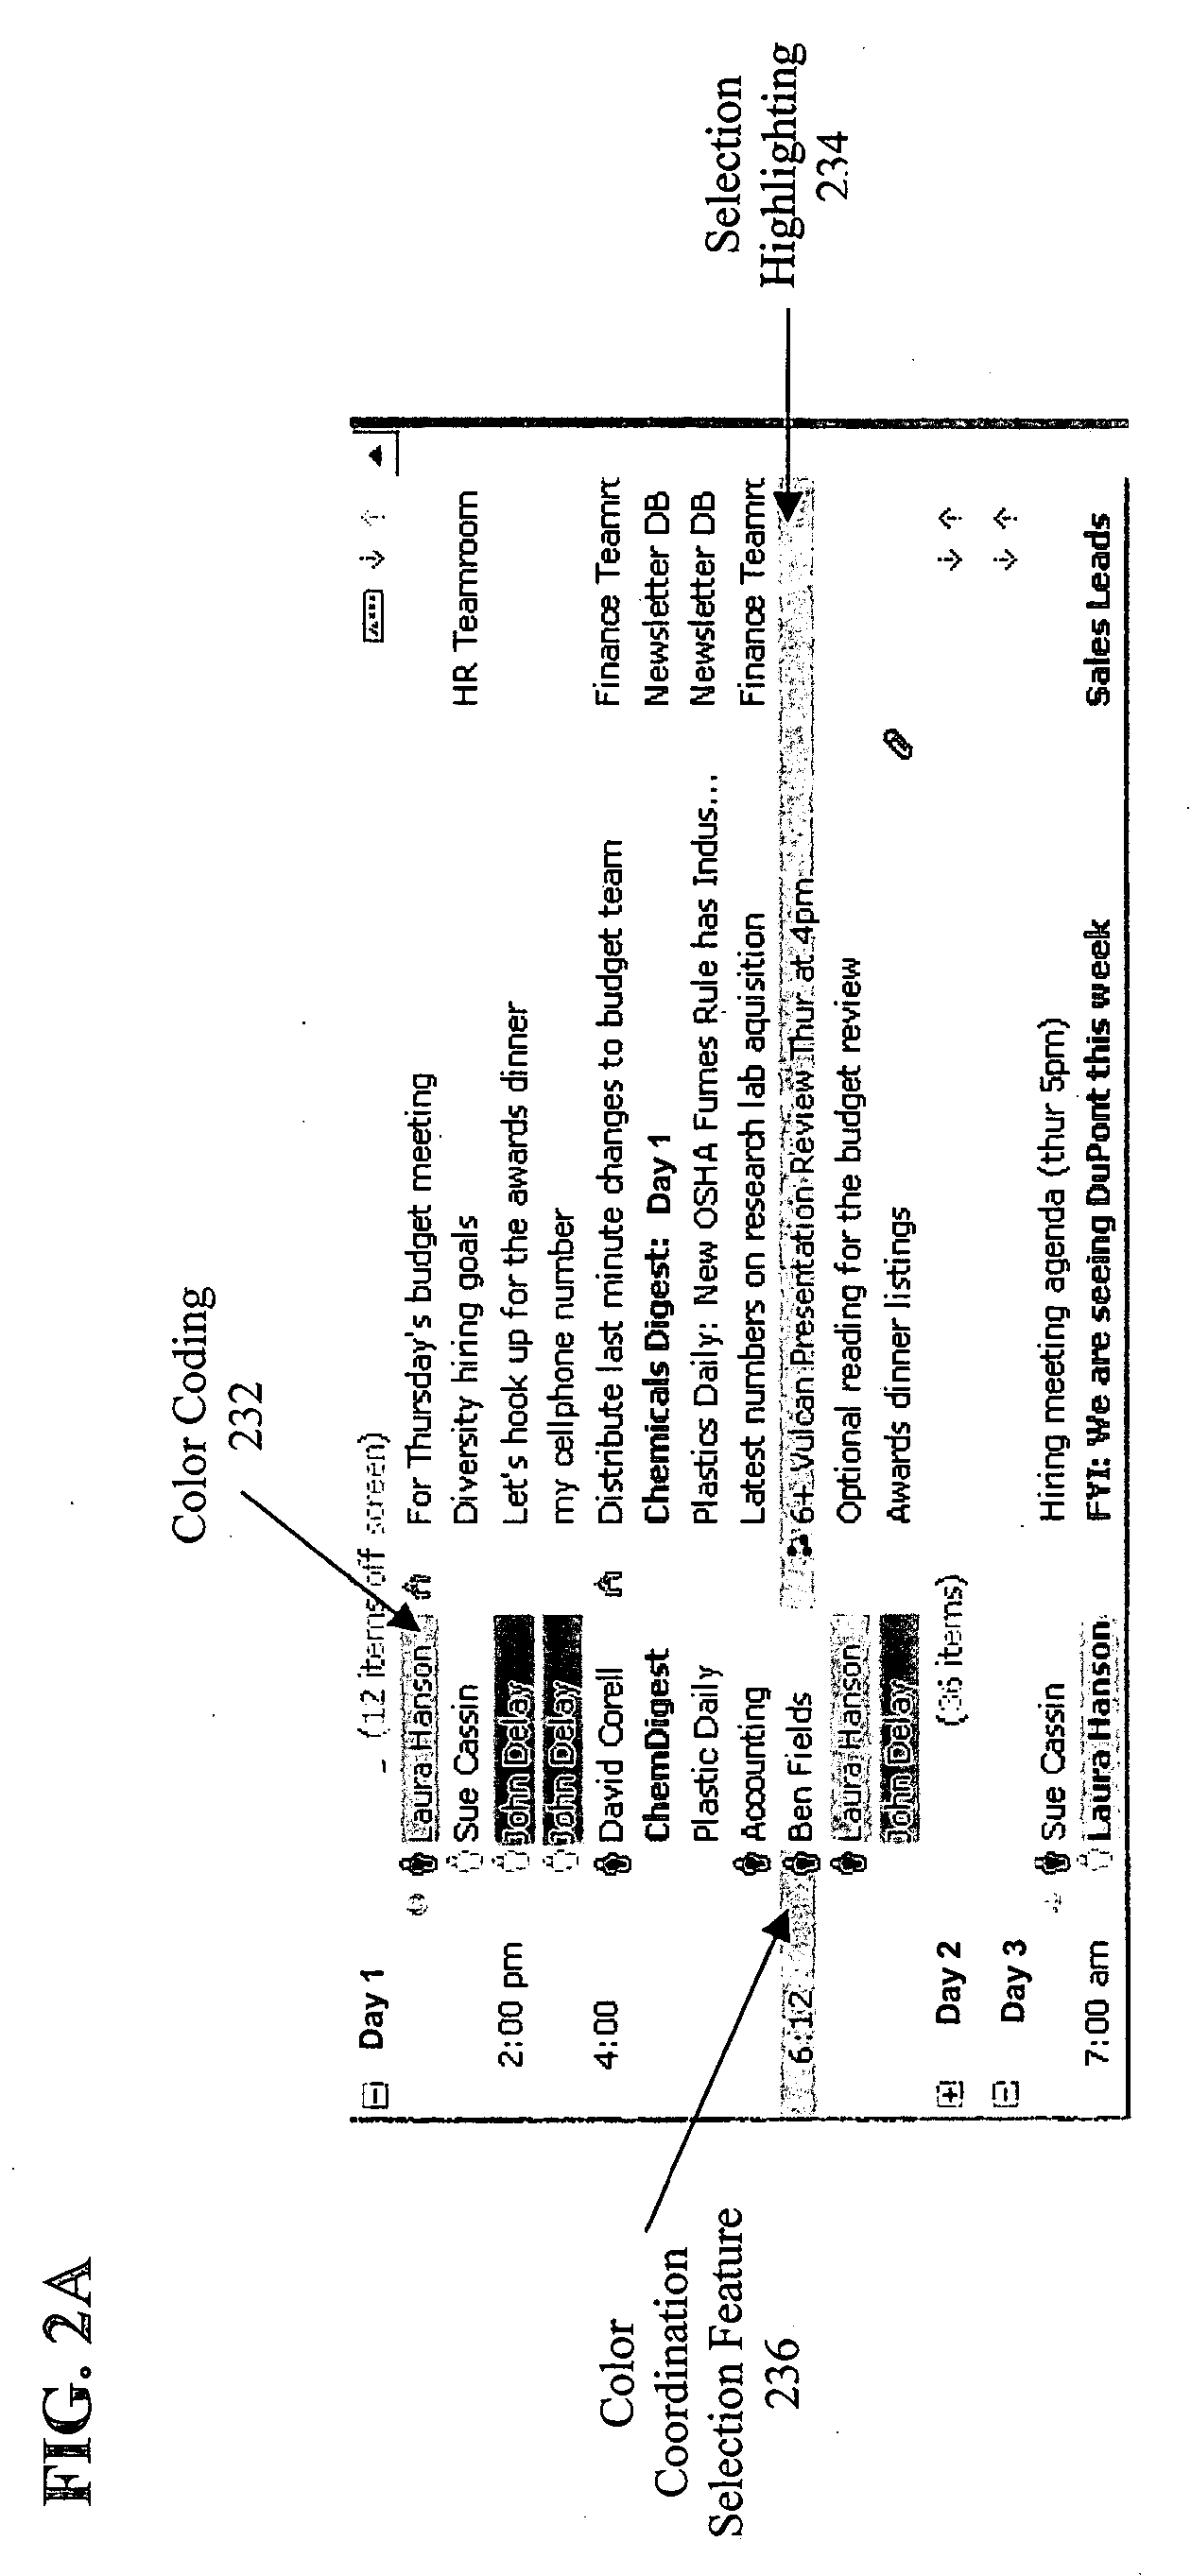 System and method for scrolling among categories in a list of documents